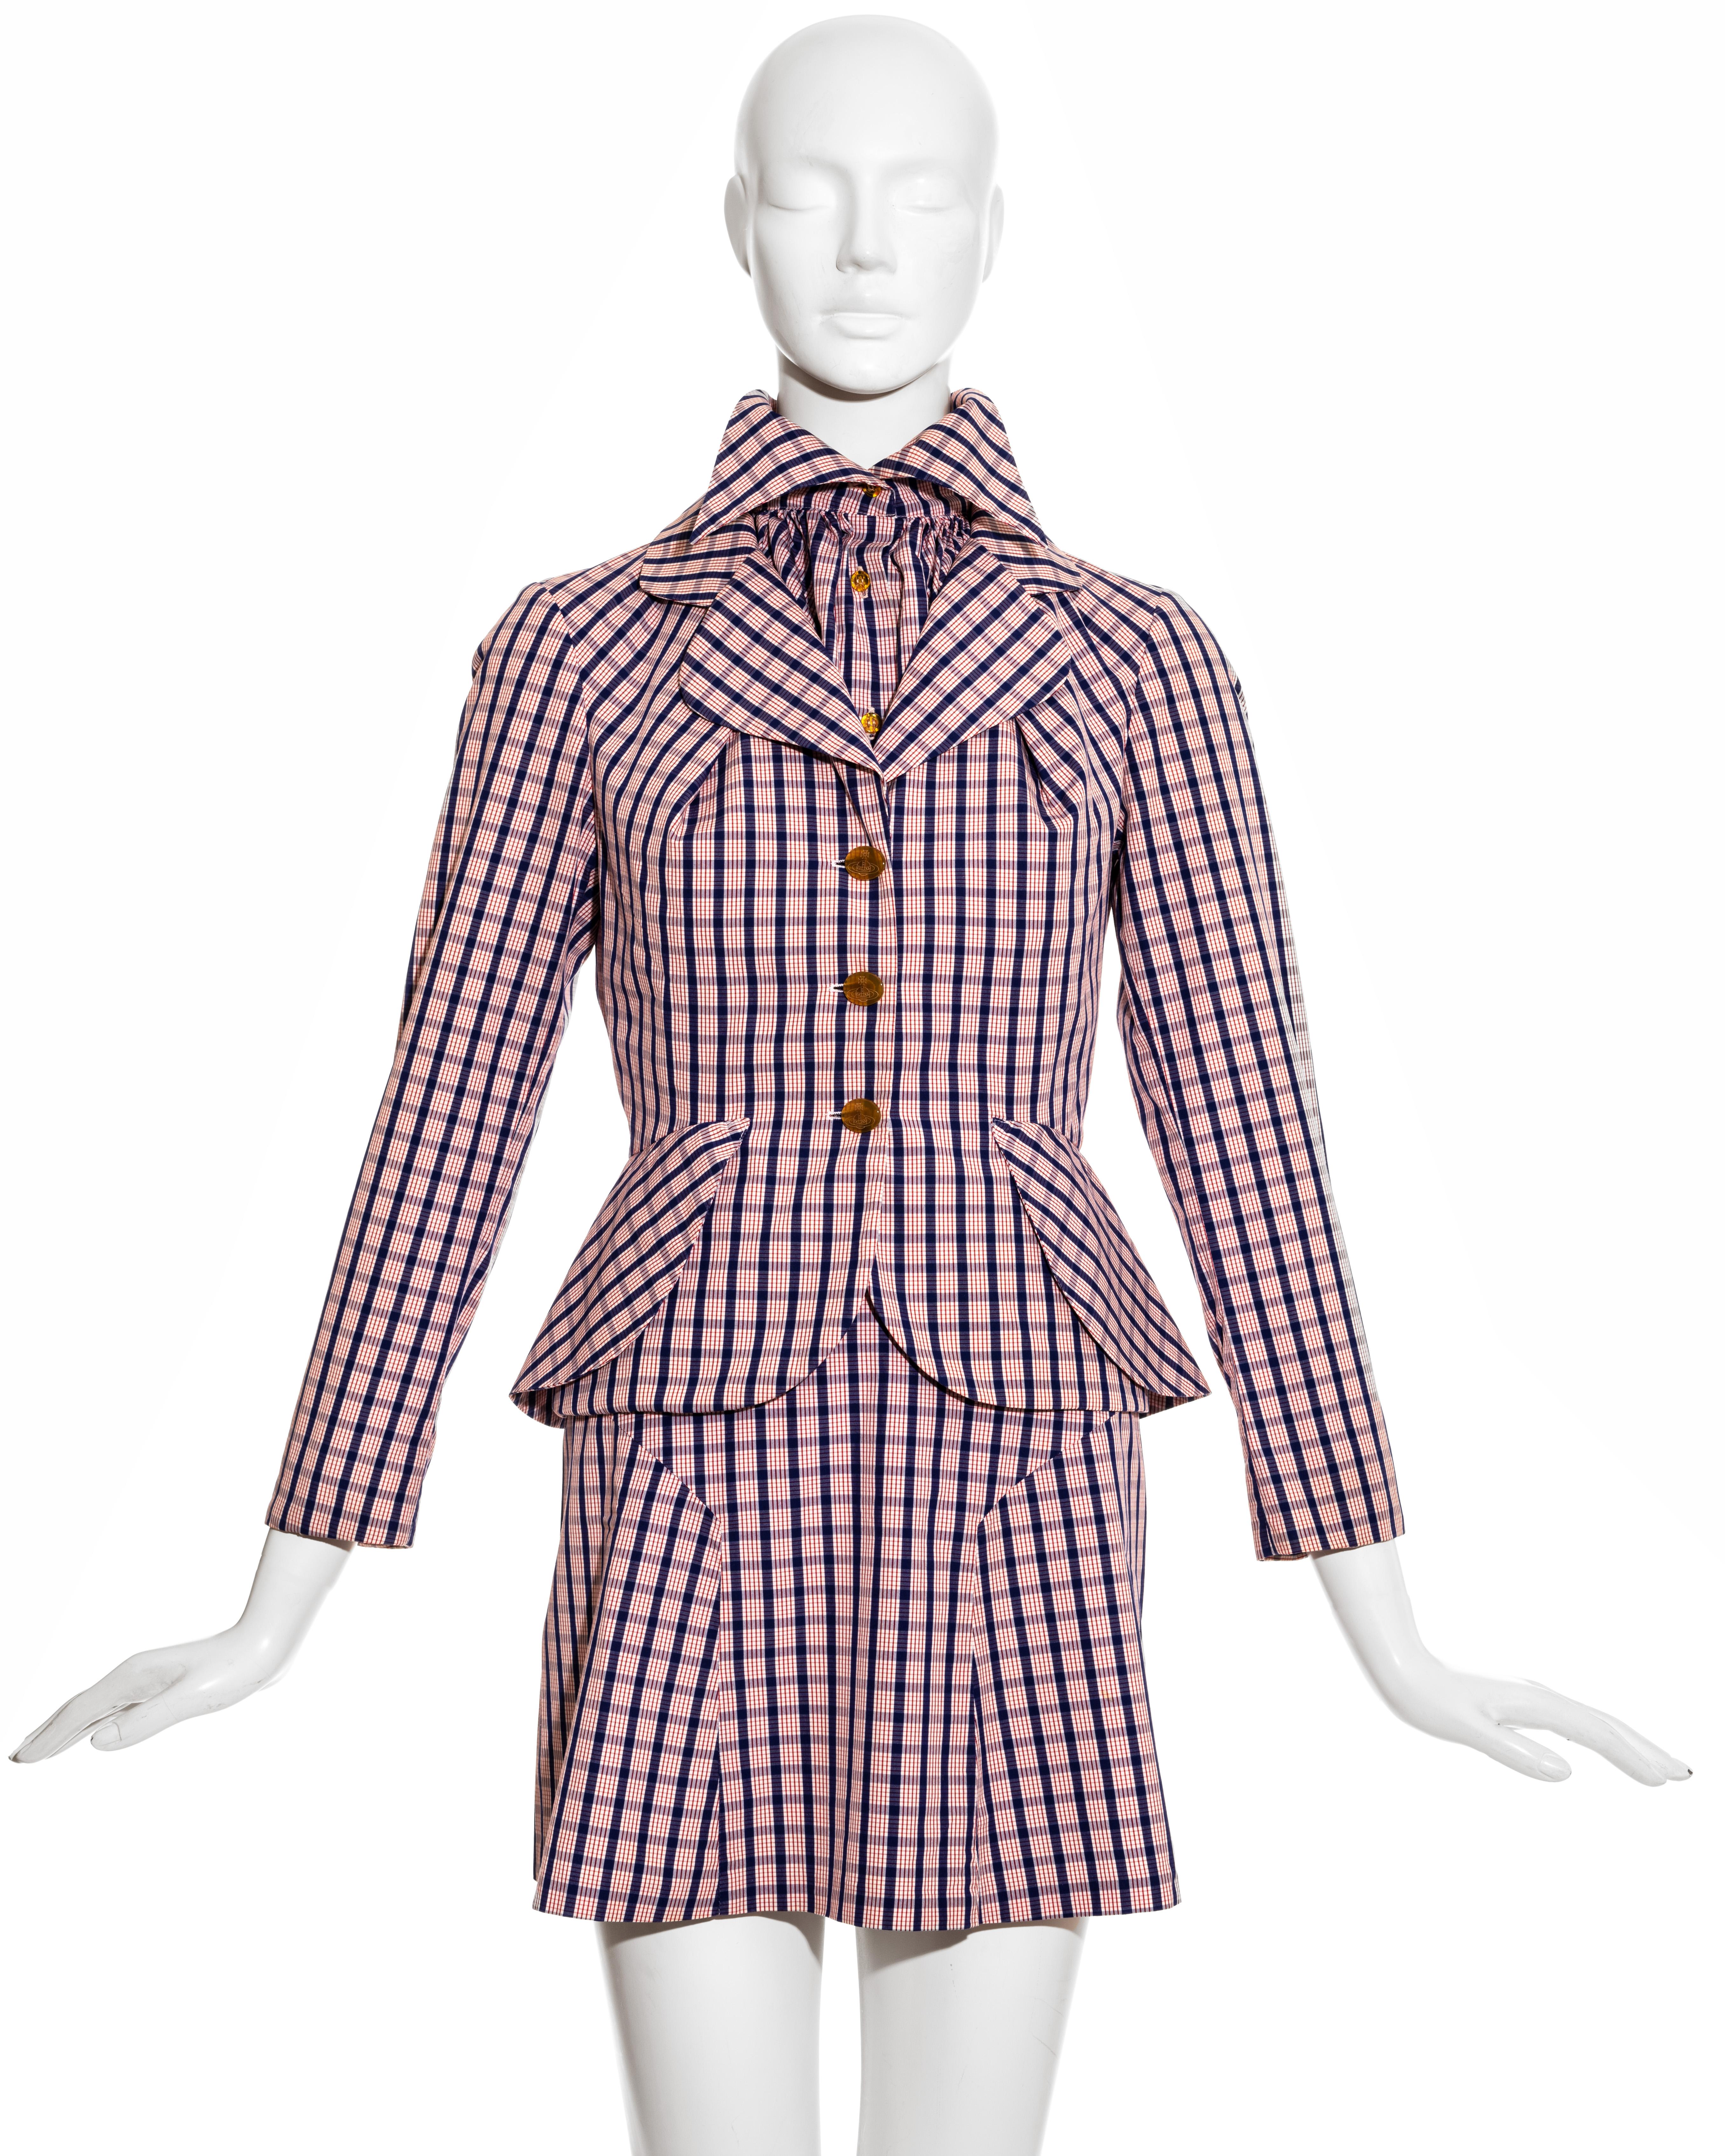 Vivienne Westwood red and blue checked cotton three piece suit comprising: halter neck blouse with high-neck pointed collar and draped bust, fitted blazer jacket with signature orb buttons and high waisted pleated mini skirt.

Cafe Society,